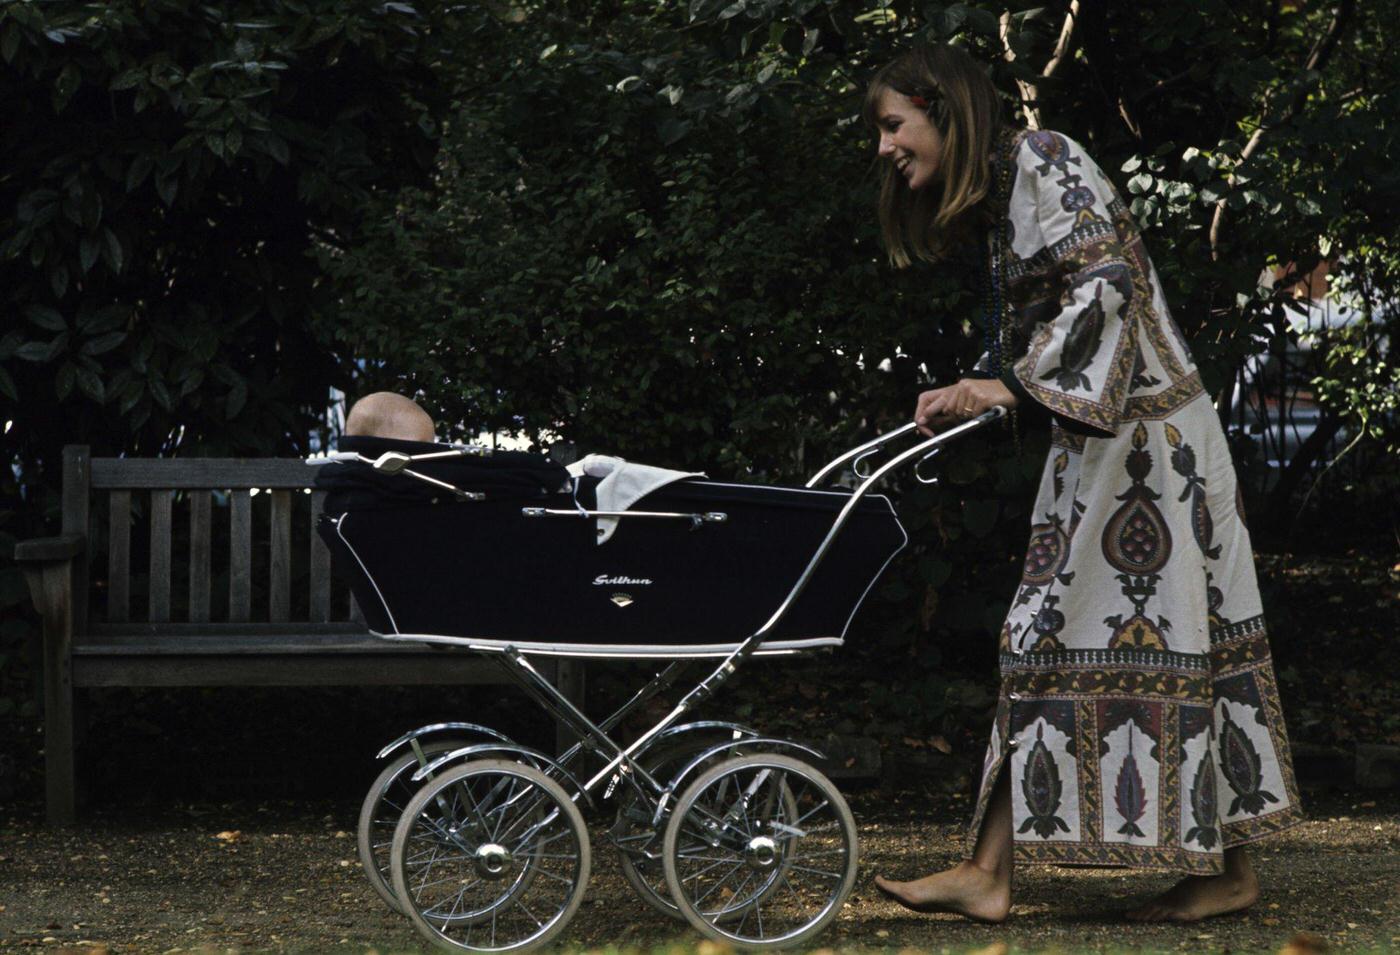 Jane Birkin and John Crittle dressed in hippie fashion. Jane wearing a cashmere dress and necklace, pushing her daughter Kate, in a pram